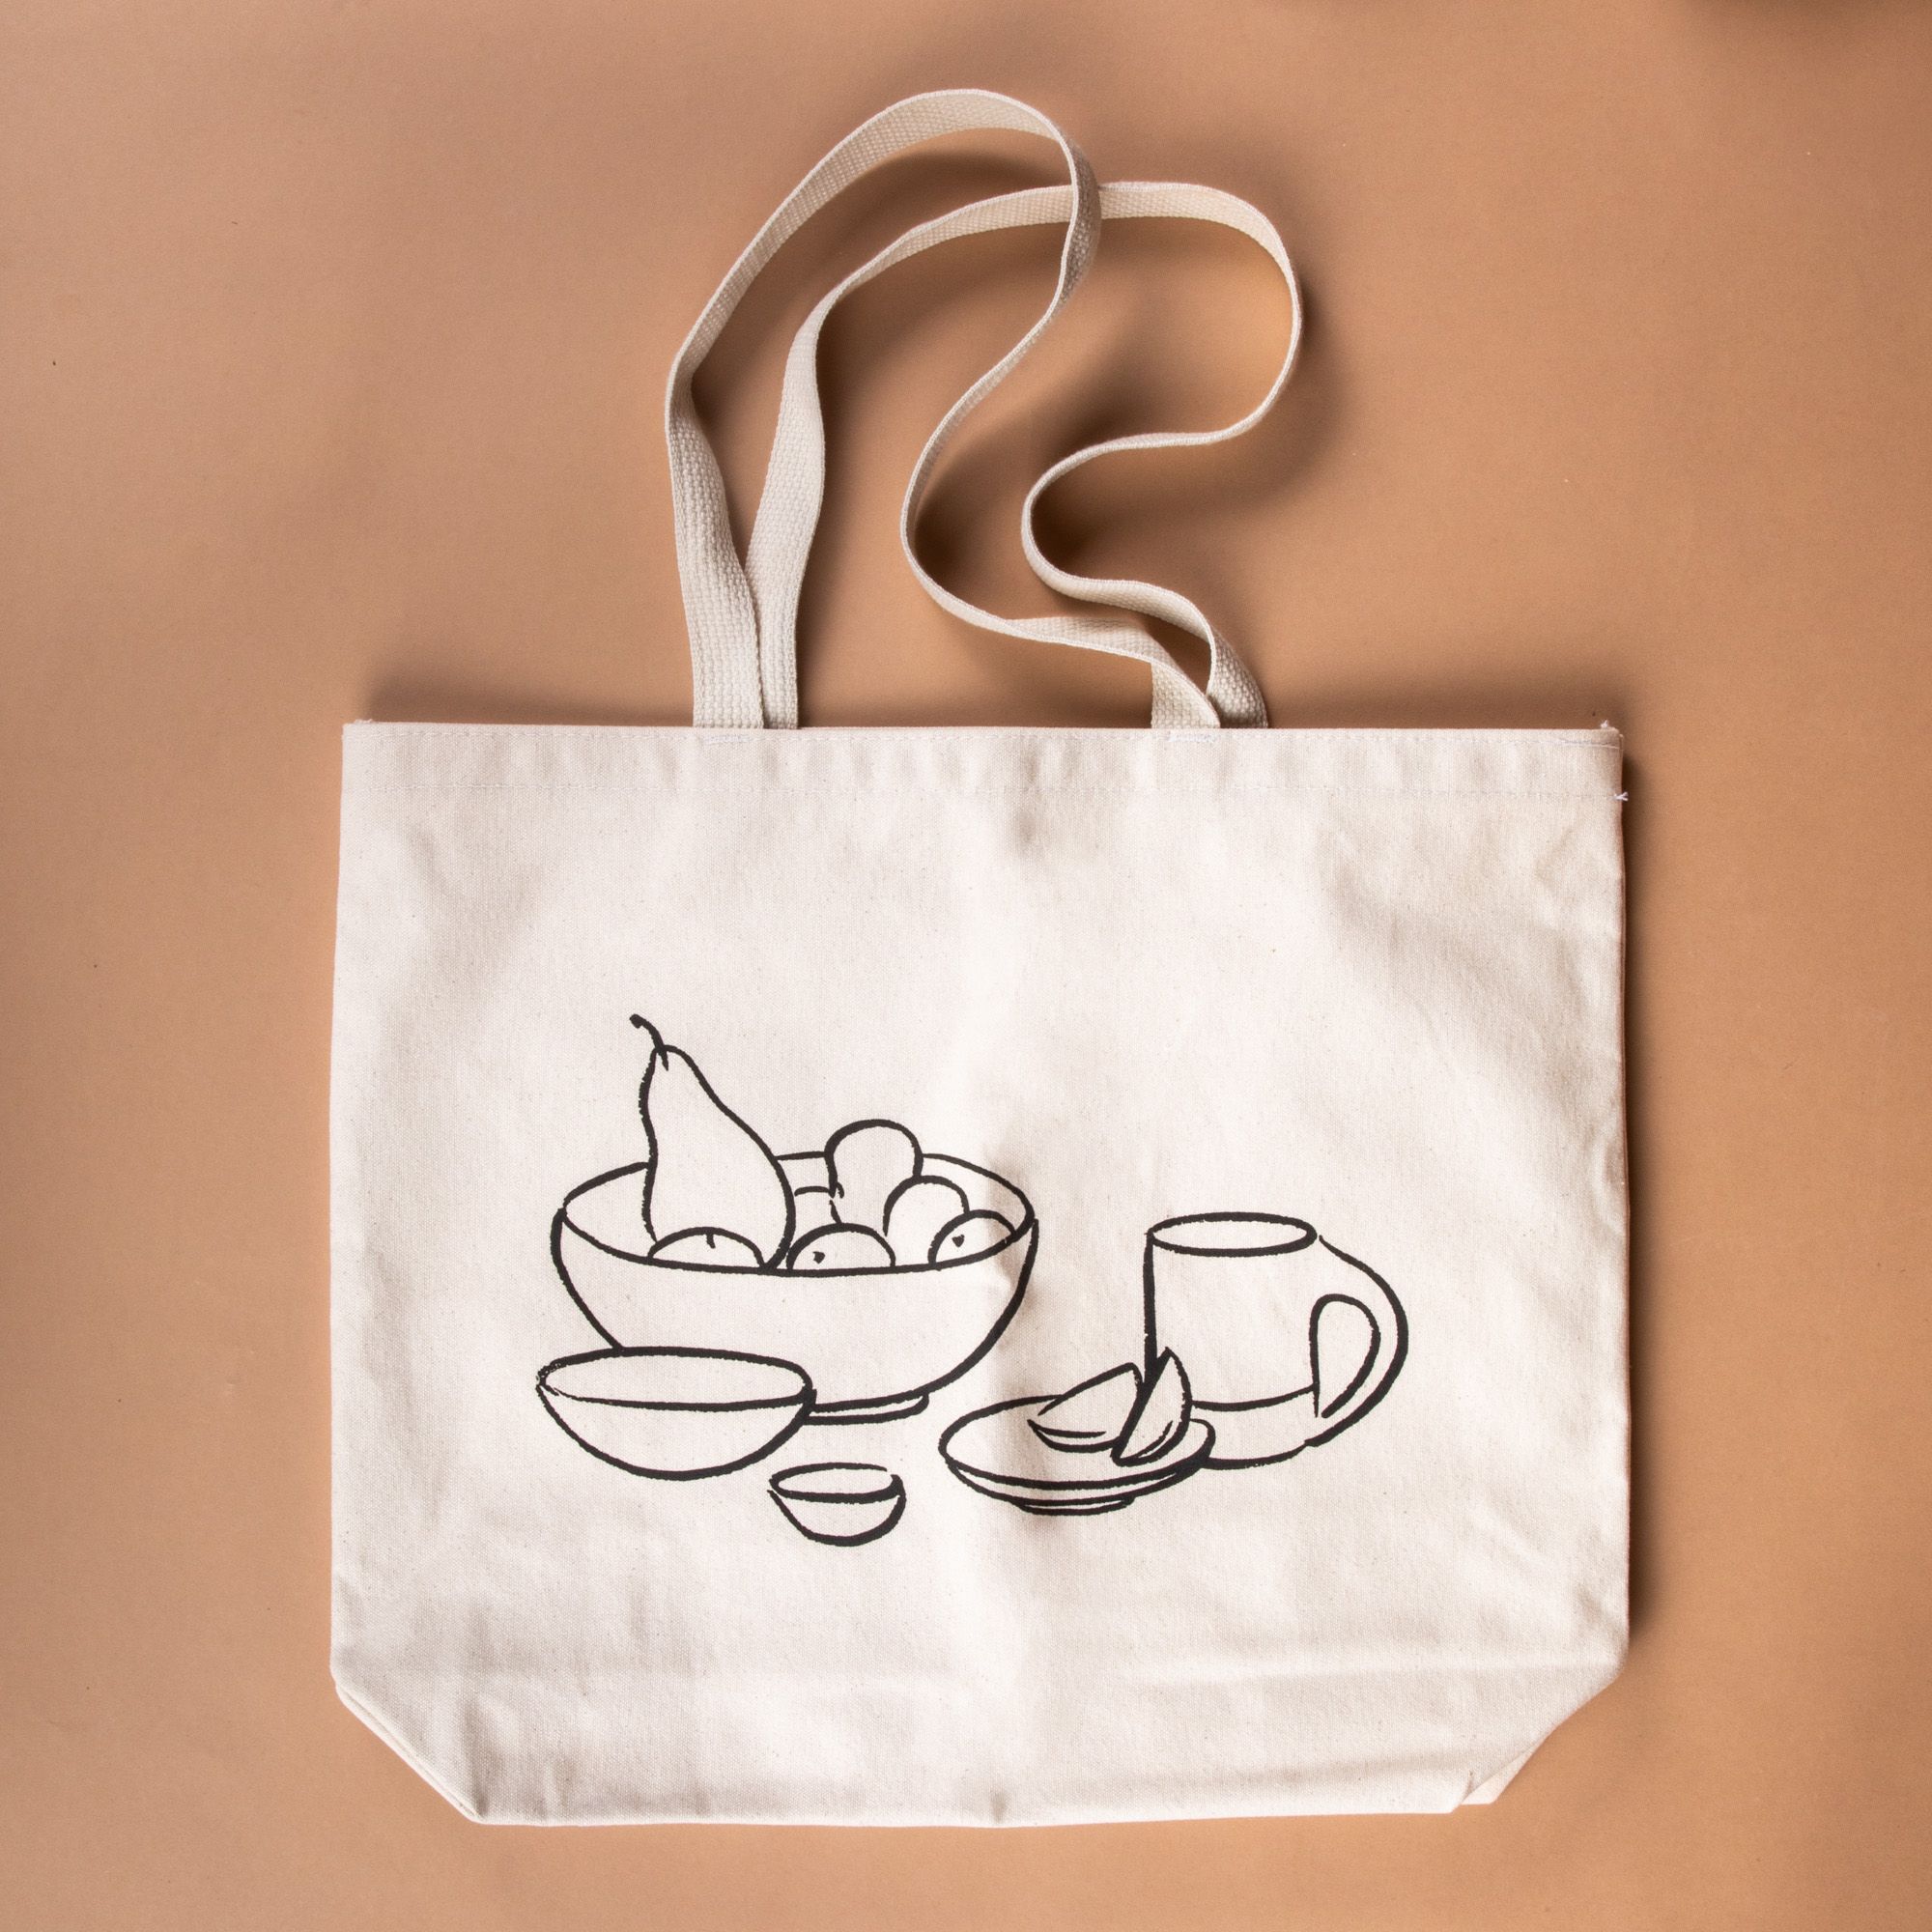 Person holding a cream canvas tote on their shoulder with their hand holding onto the handle - the tote has a charcoal illustration on the front of a bowl with fruit, little bowls, plate, and a mug. Underneath, it reads 'East Fork is a vessel'.